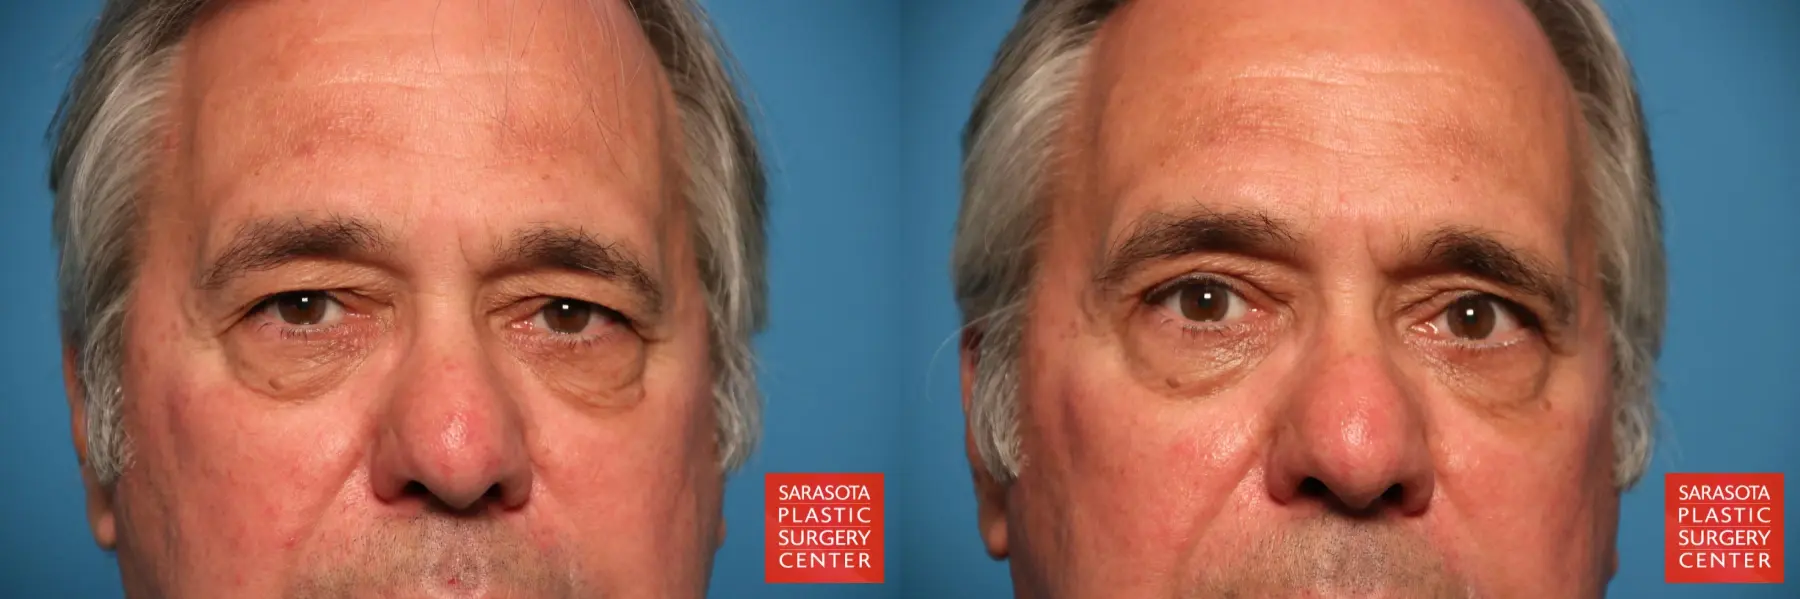 Eyelid Surgery: Patient 21 - Before and After  